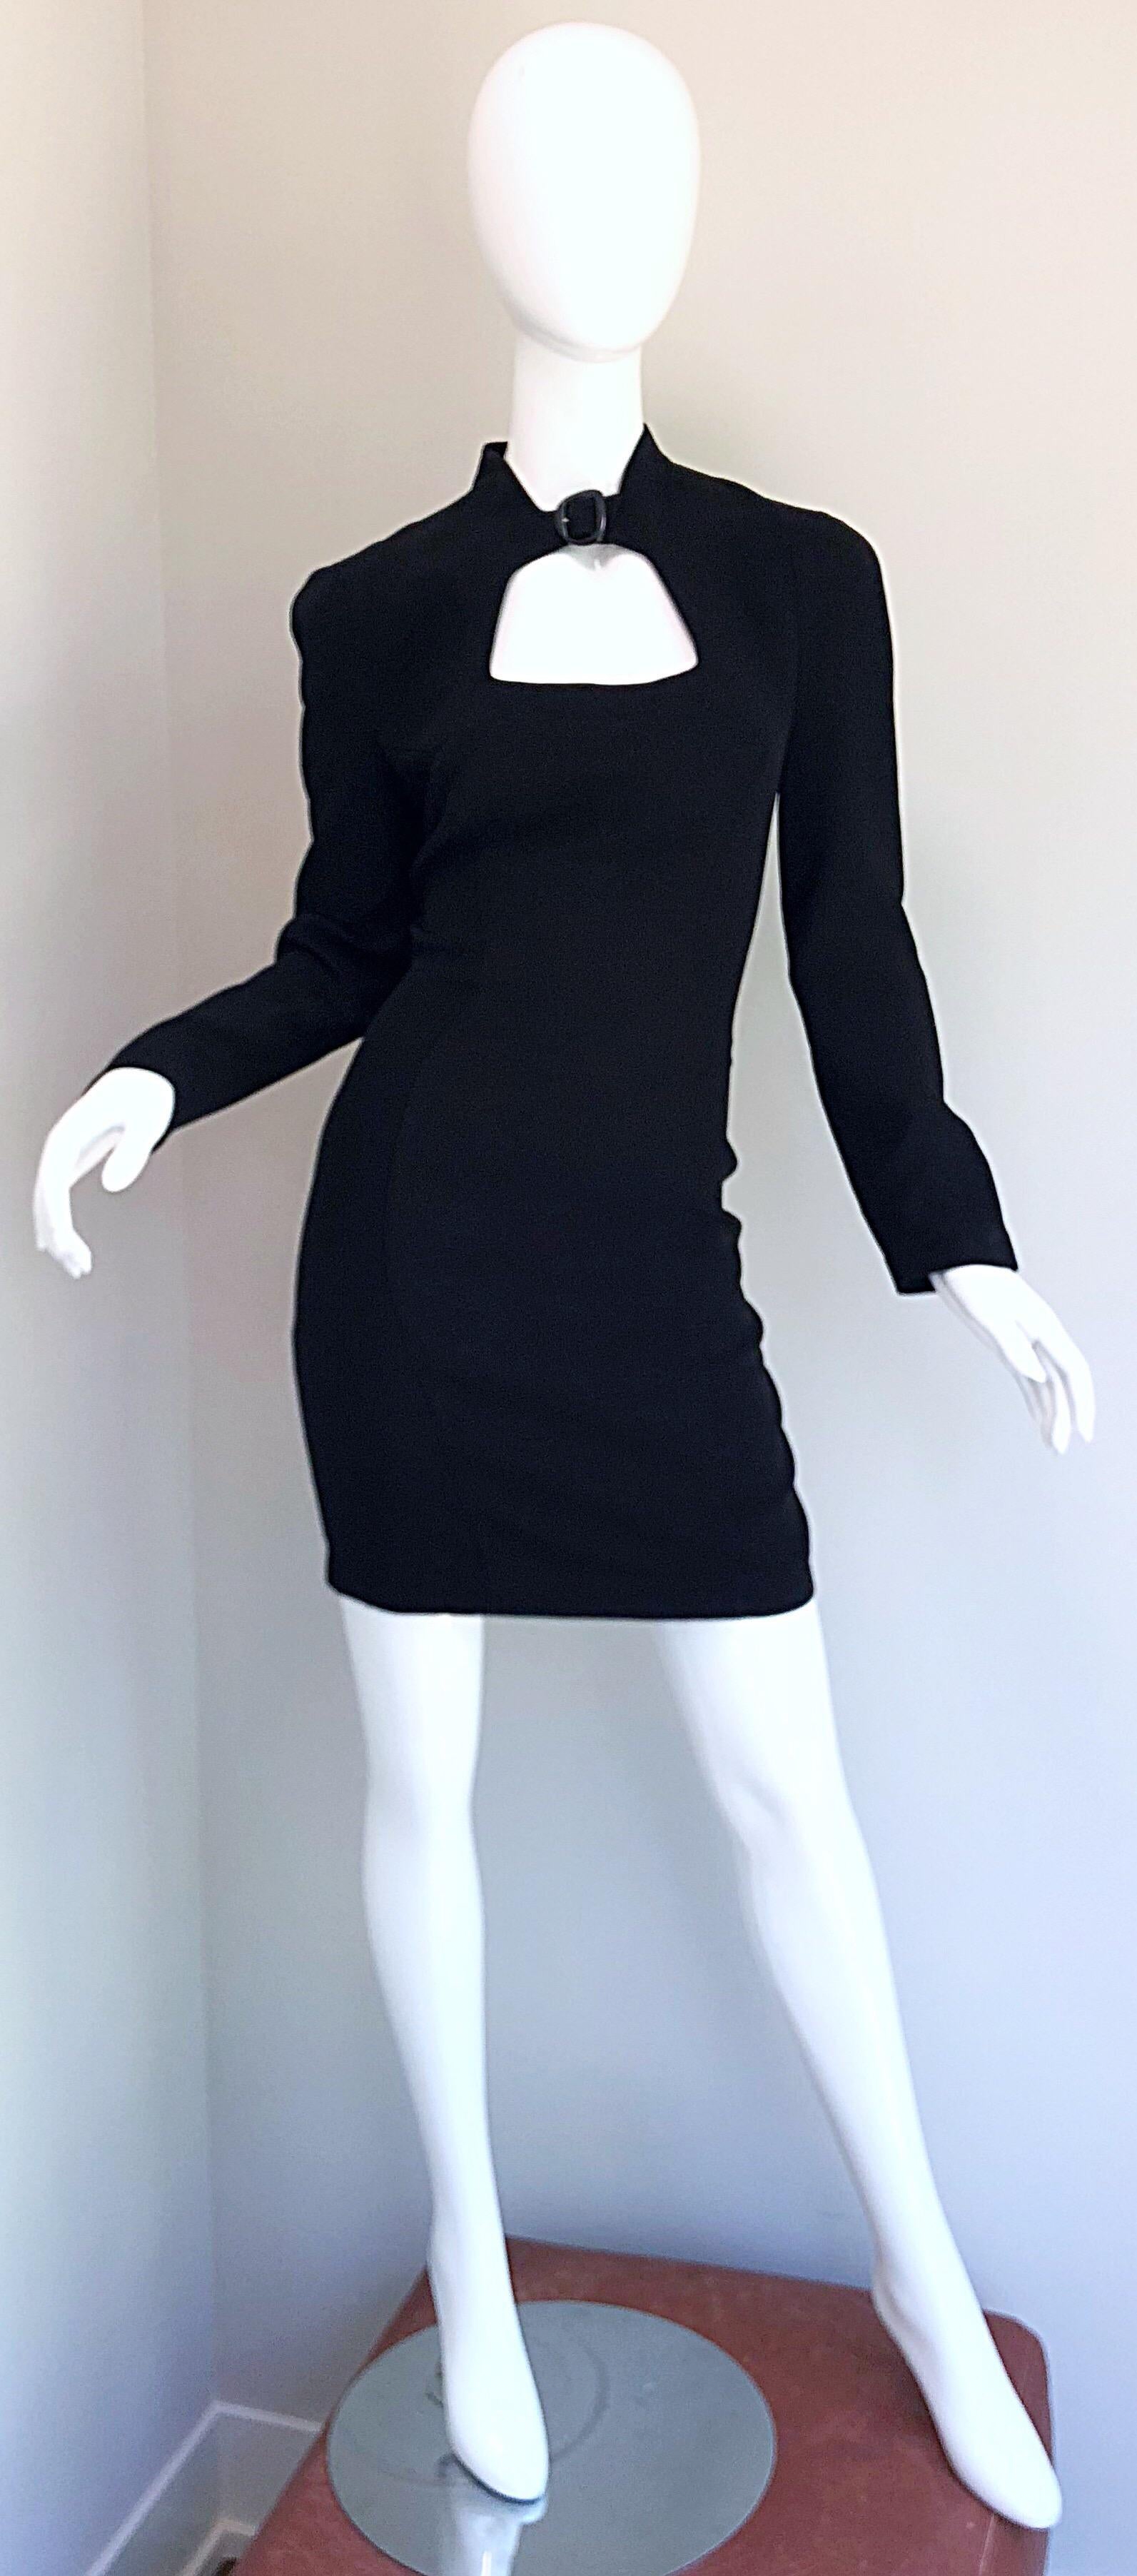 Iconic Vintage Thierry Mugler 80s Bondage Inspired Cut - Out Black 1980s Dress For Sale 7